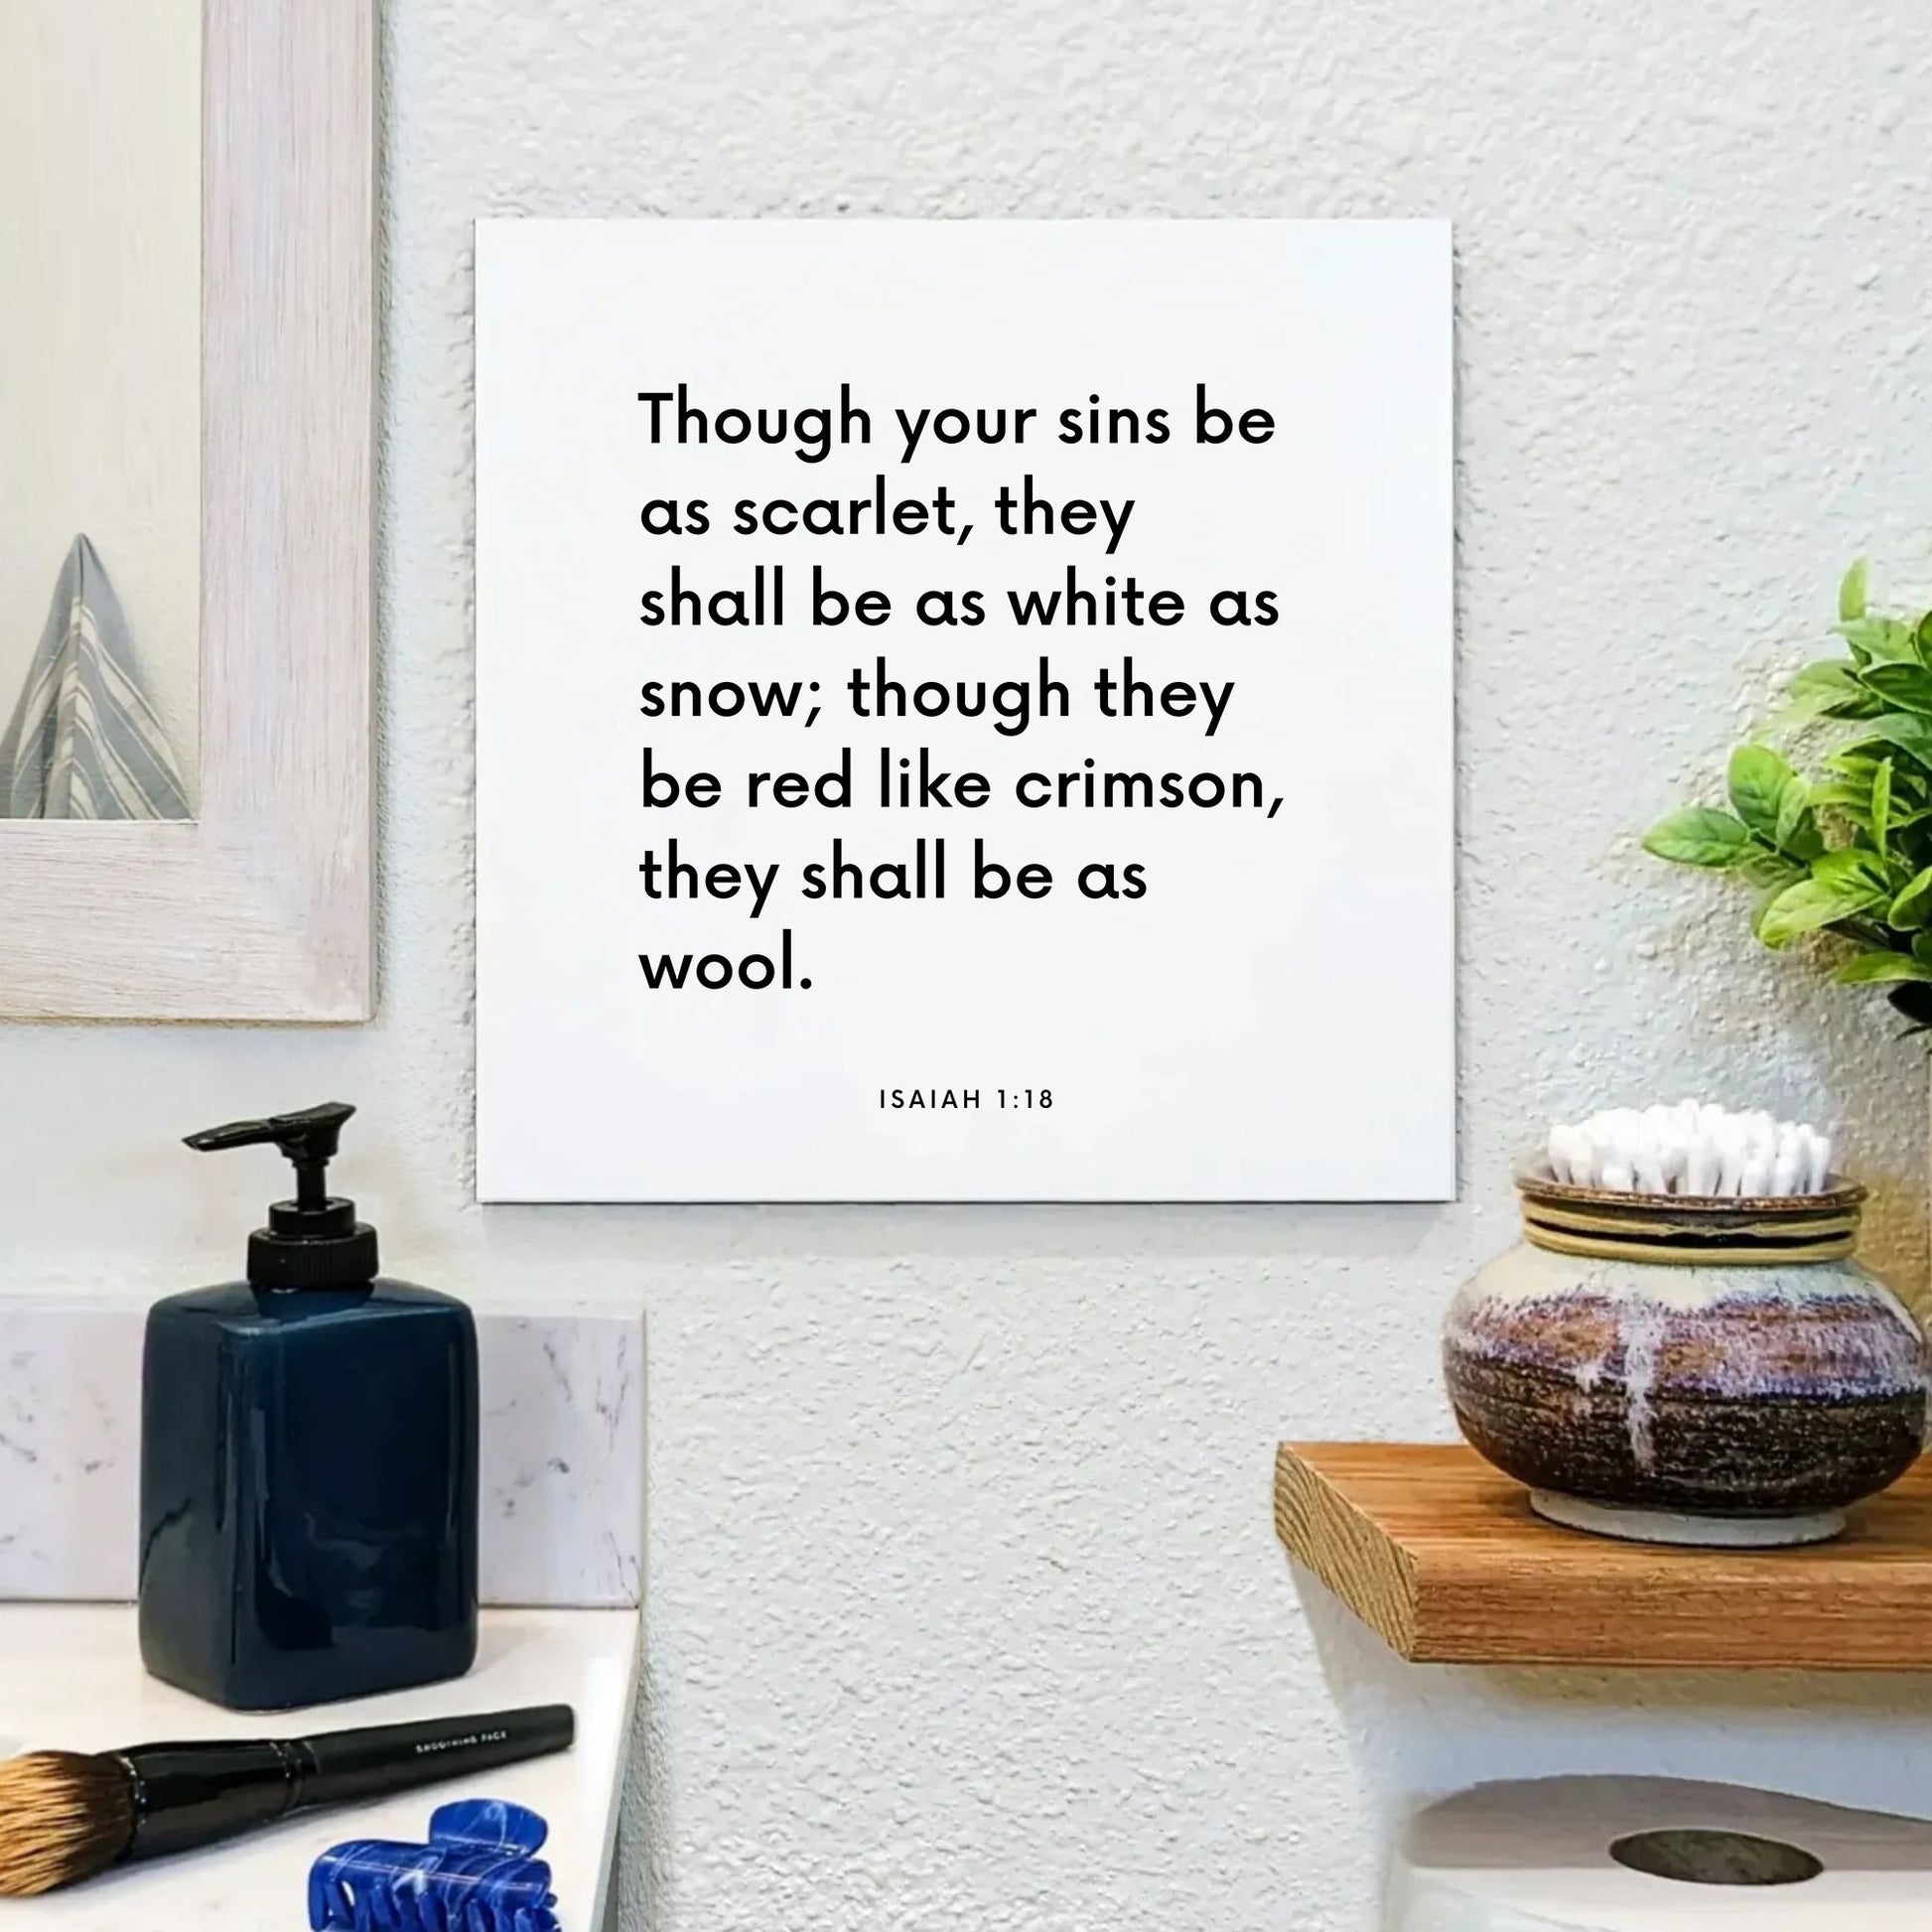 Bathroom mouting of the scripture tile for Isaiah 1:18 - "Though your sins be as scarlet, they shall be white as snow"